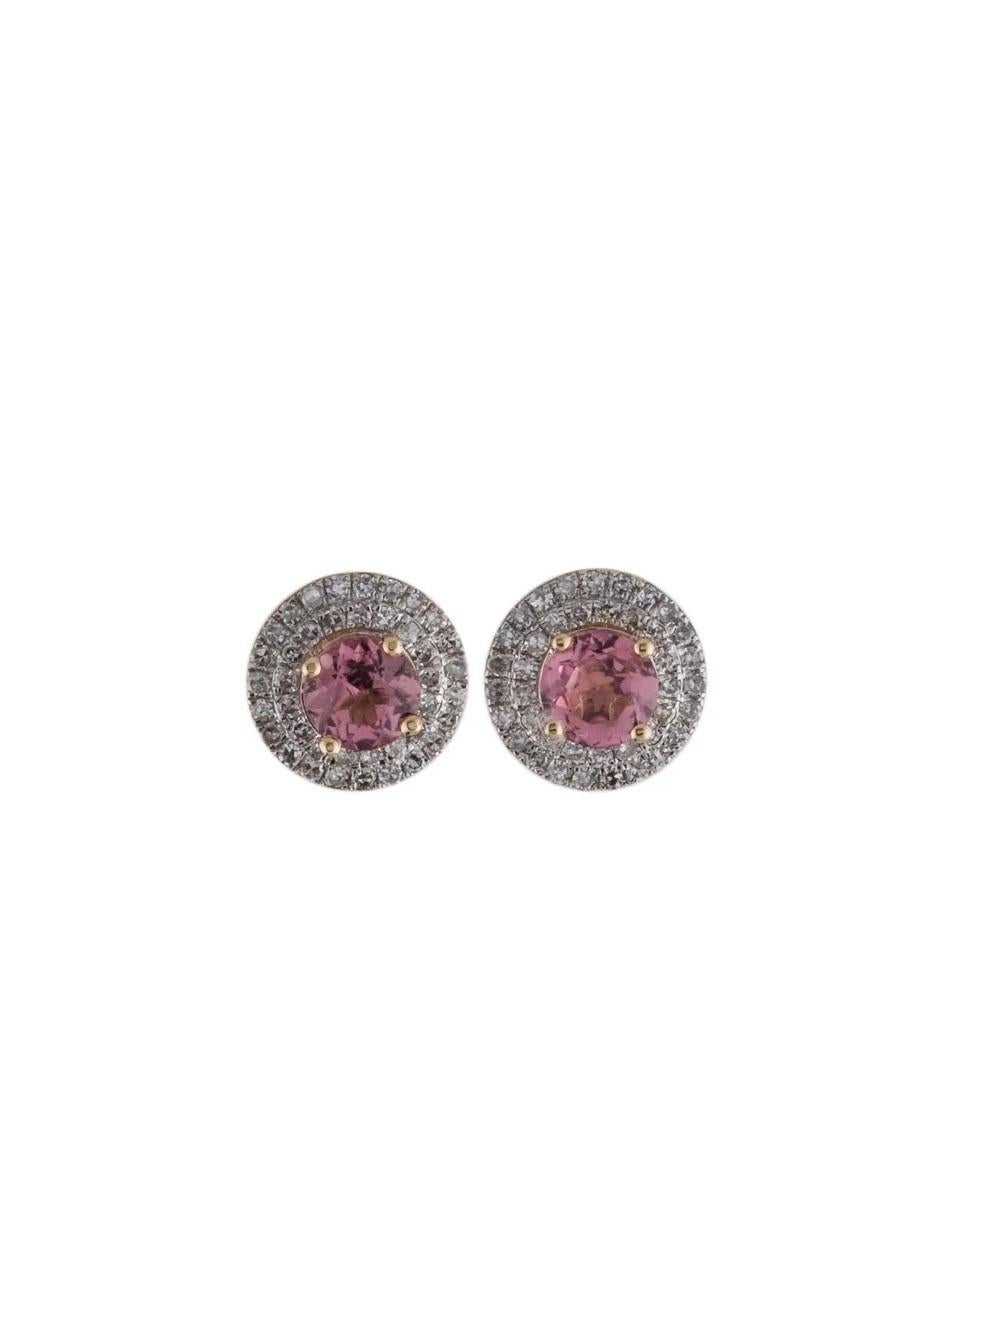 14K Tourmaline Diamond Stud Earrings - Vintage Statement Jewelry, Luxury In New Condition For Sale In Holtsville, NY